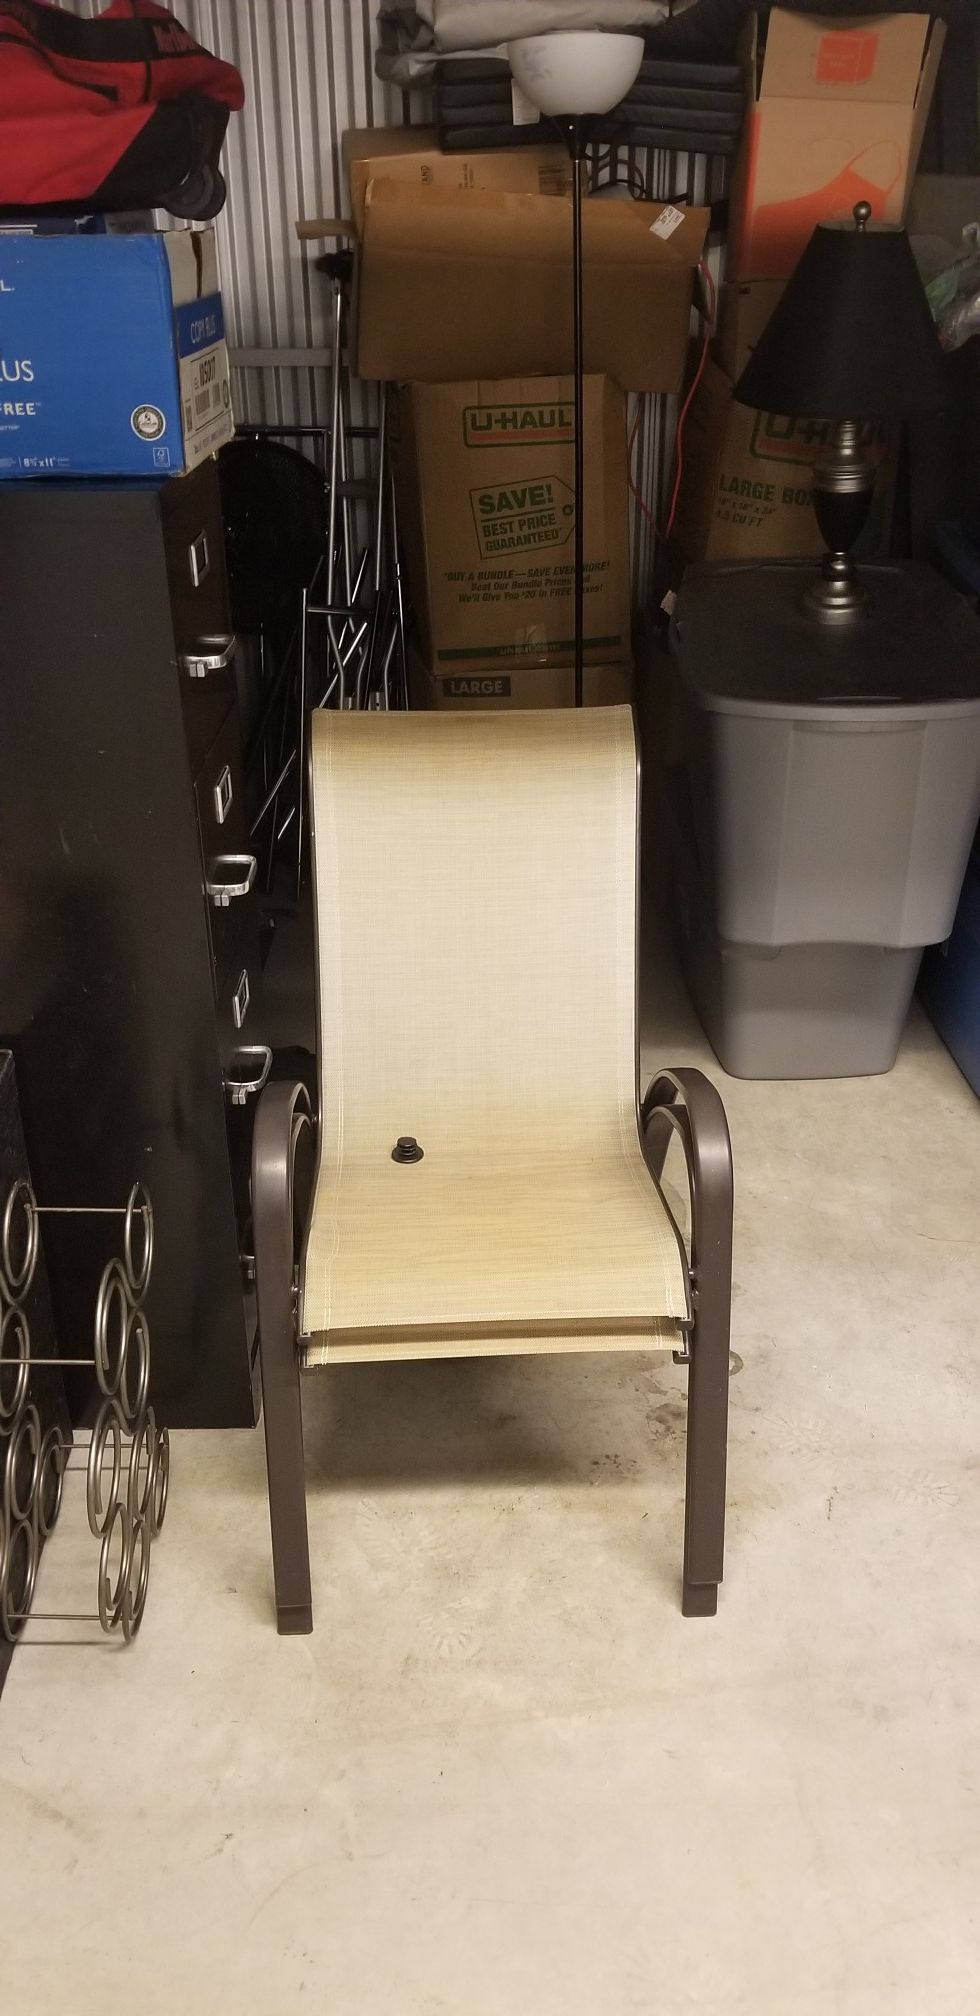 2 Brand new Lawn/Patio Chairs